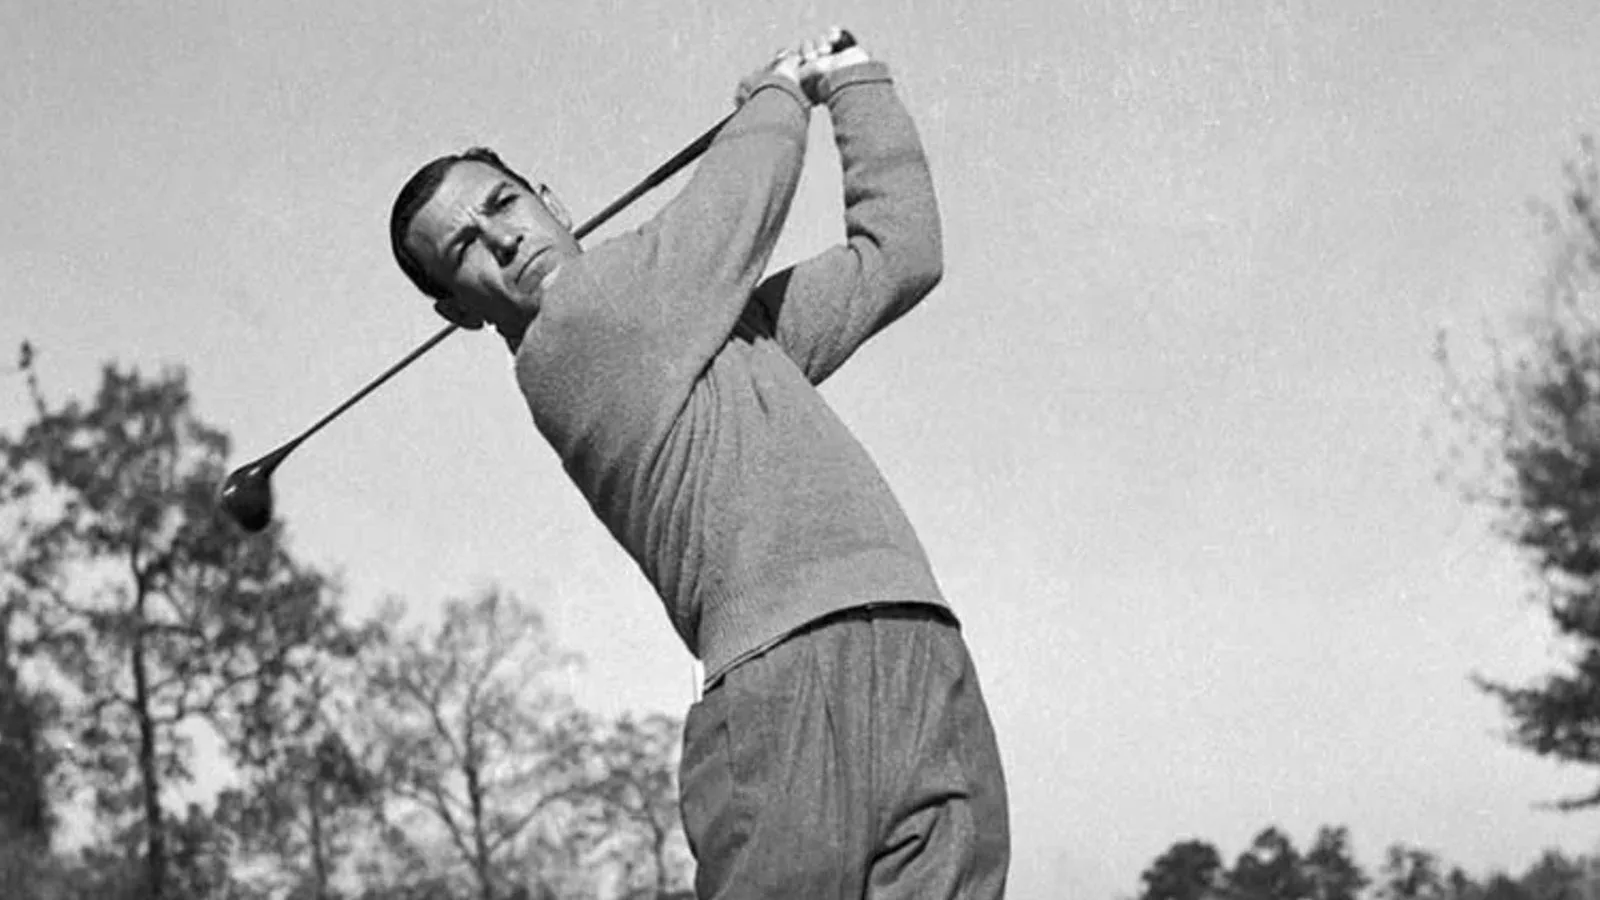 Ben Hogan ranked 3rd among Best Golfers of All Time